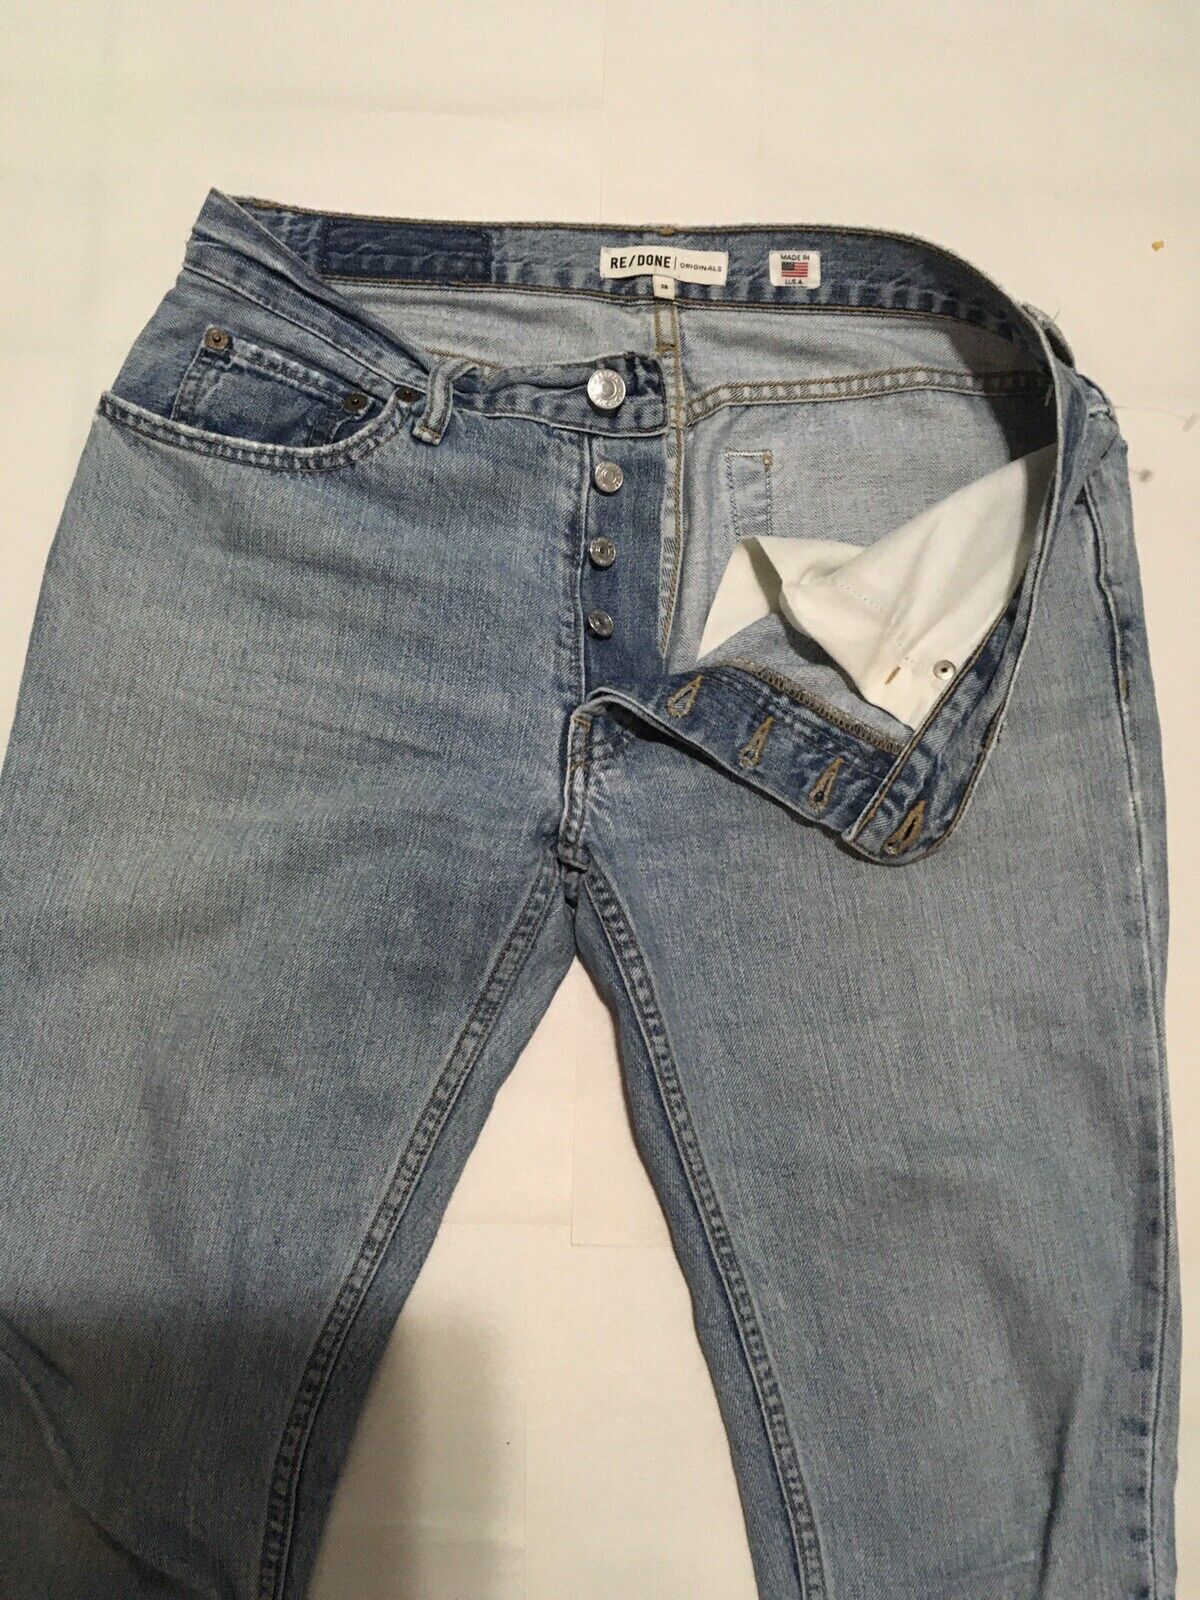 Re/done relaxed crop jeans ultra light sz 26 - image 2